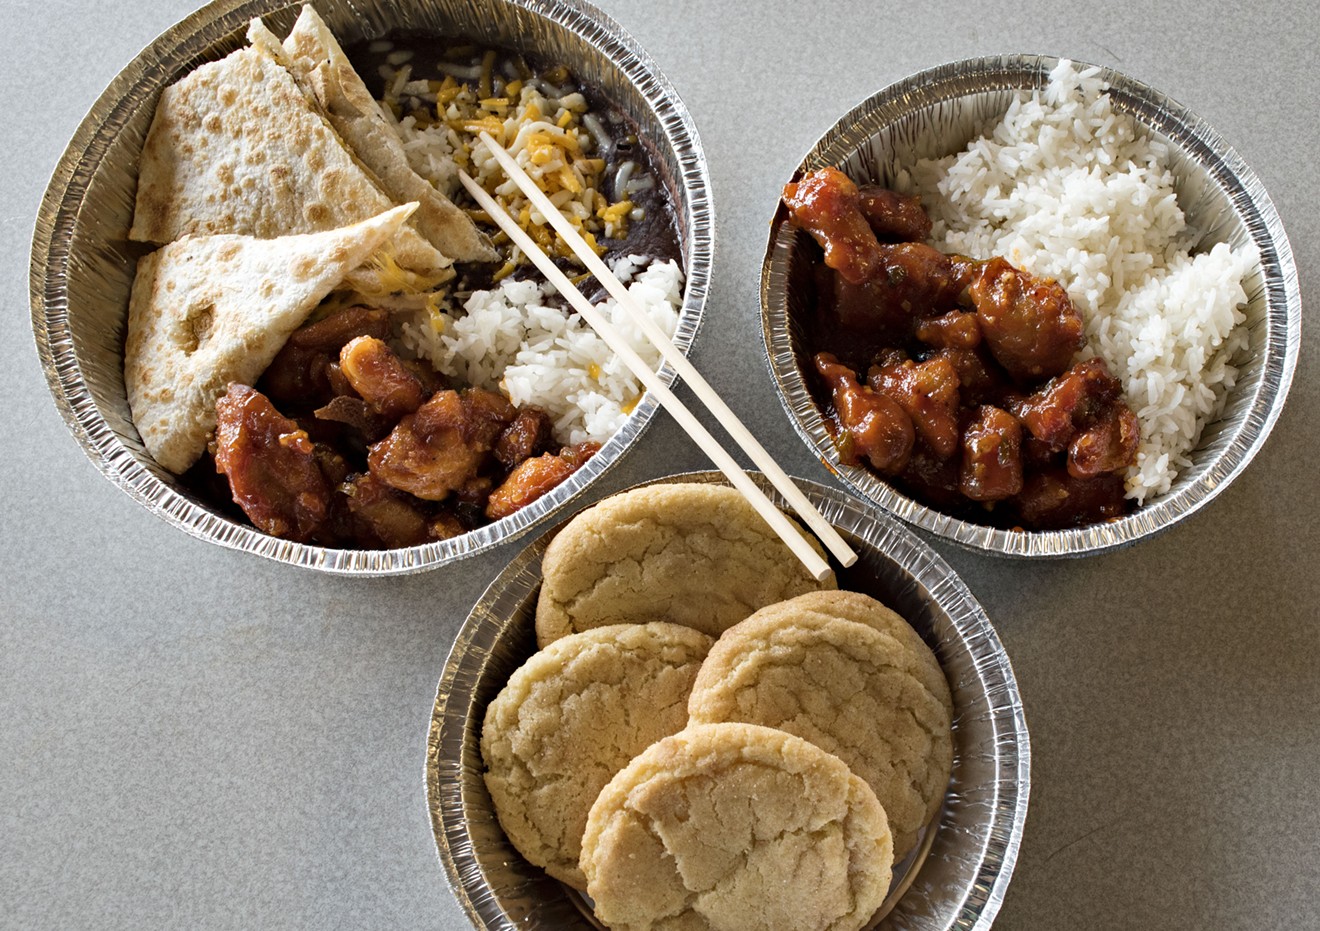 Anything goes at this classic Mex-Chinese restaurant in north Phoenix.